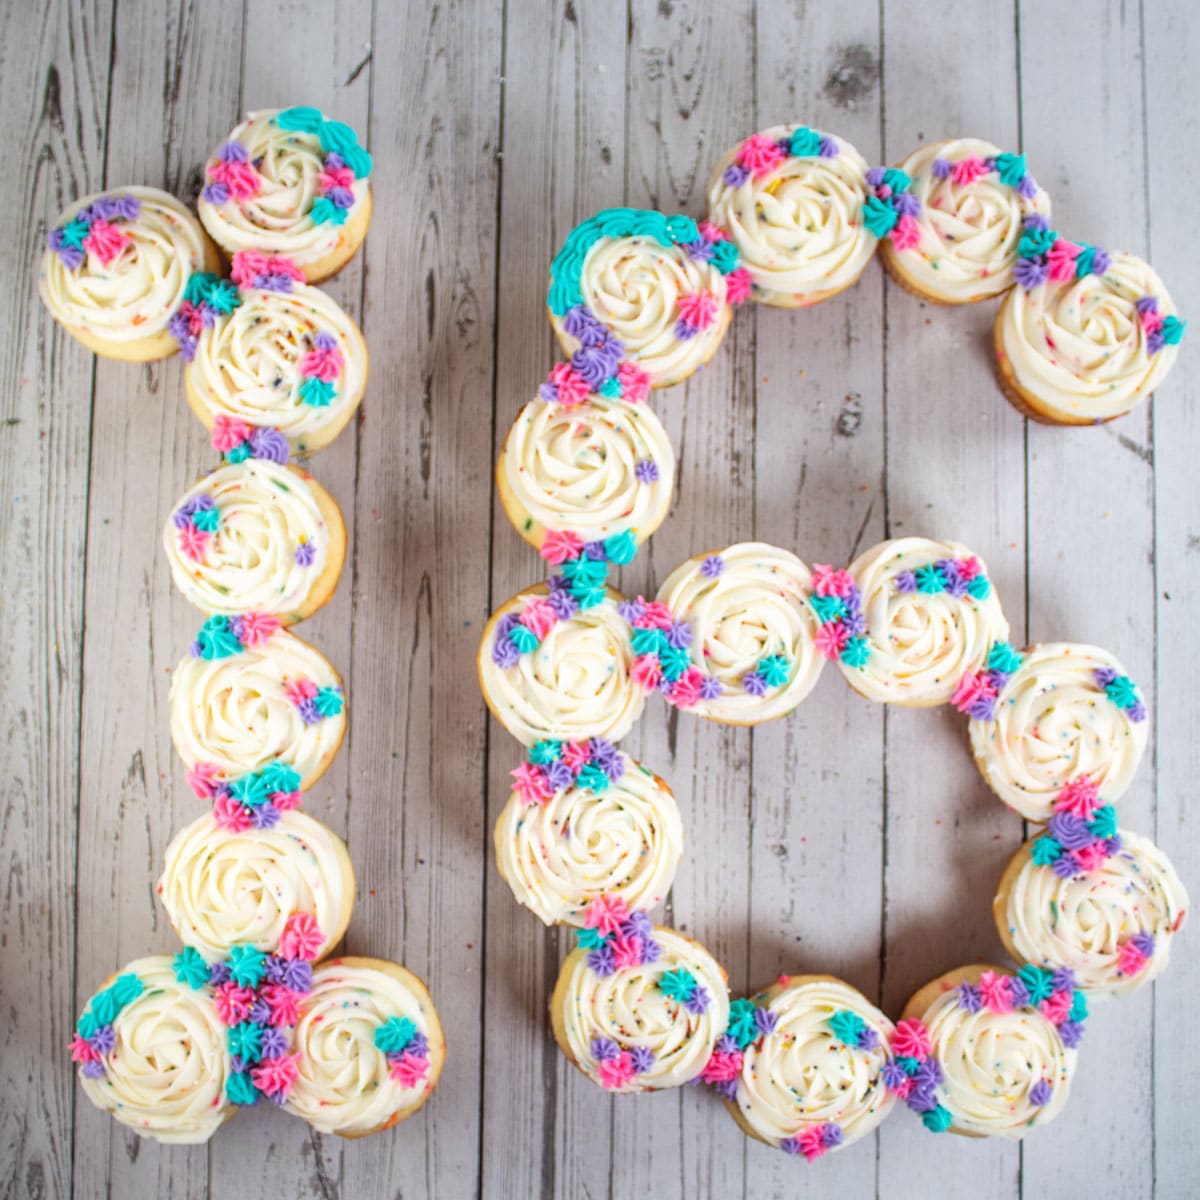 How To Make A Number Cupcake Cake: Easy Complete Tutorial